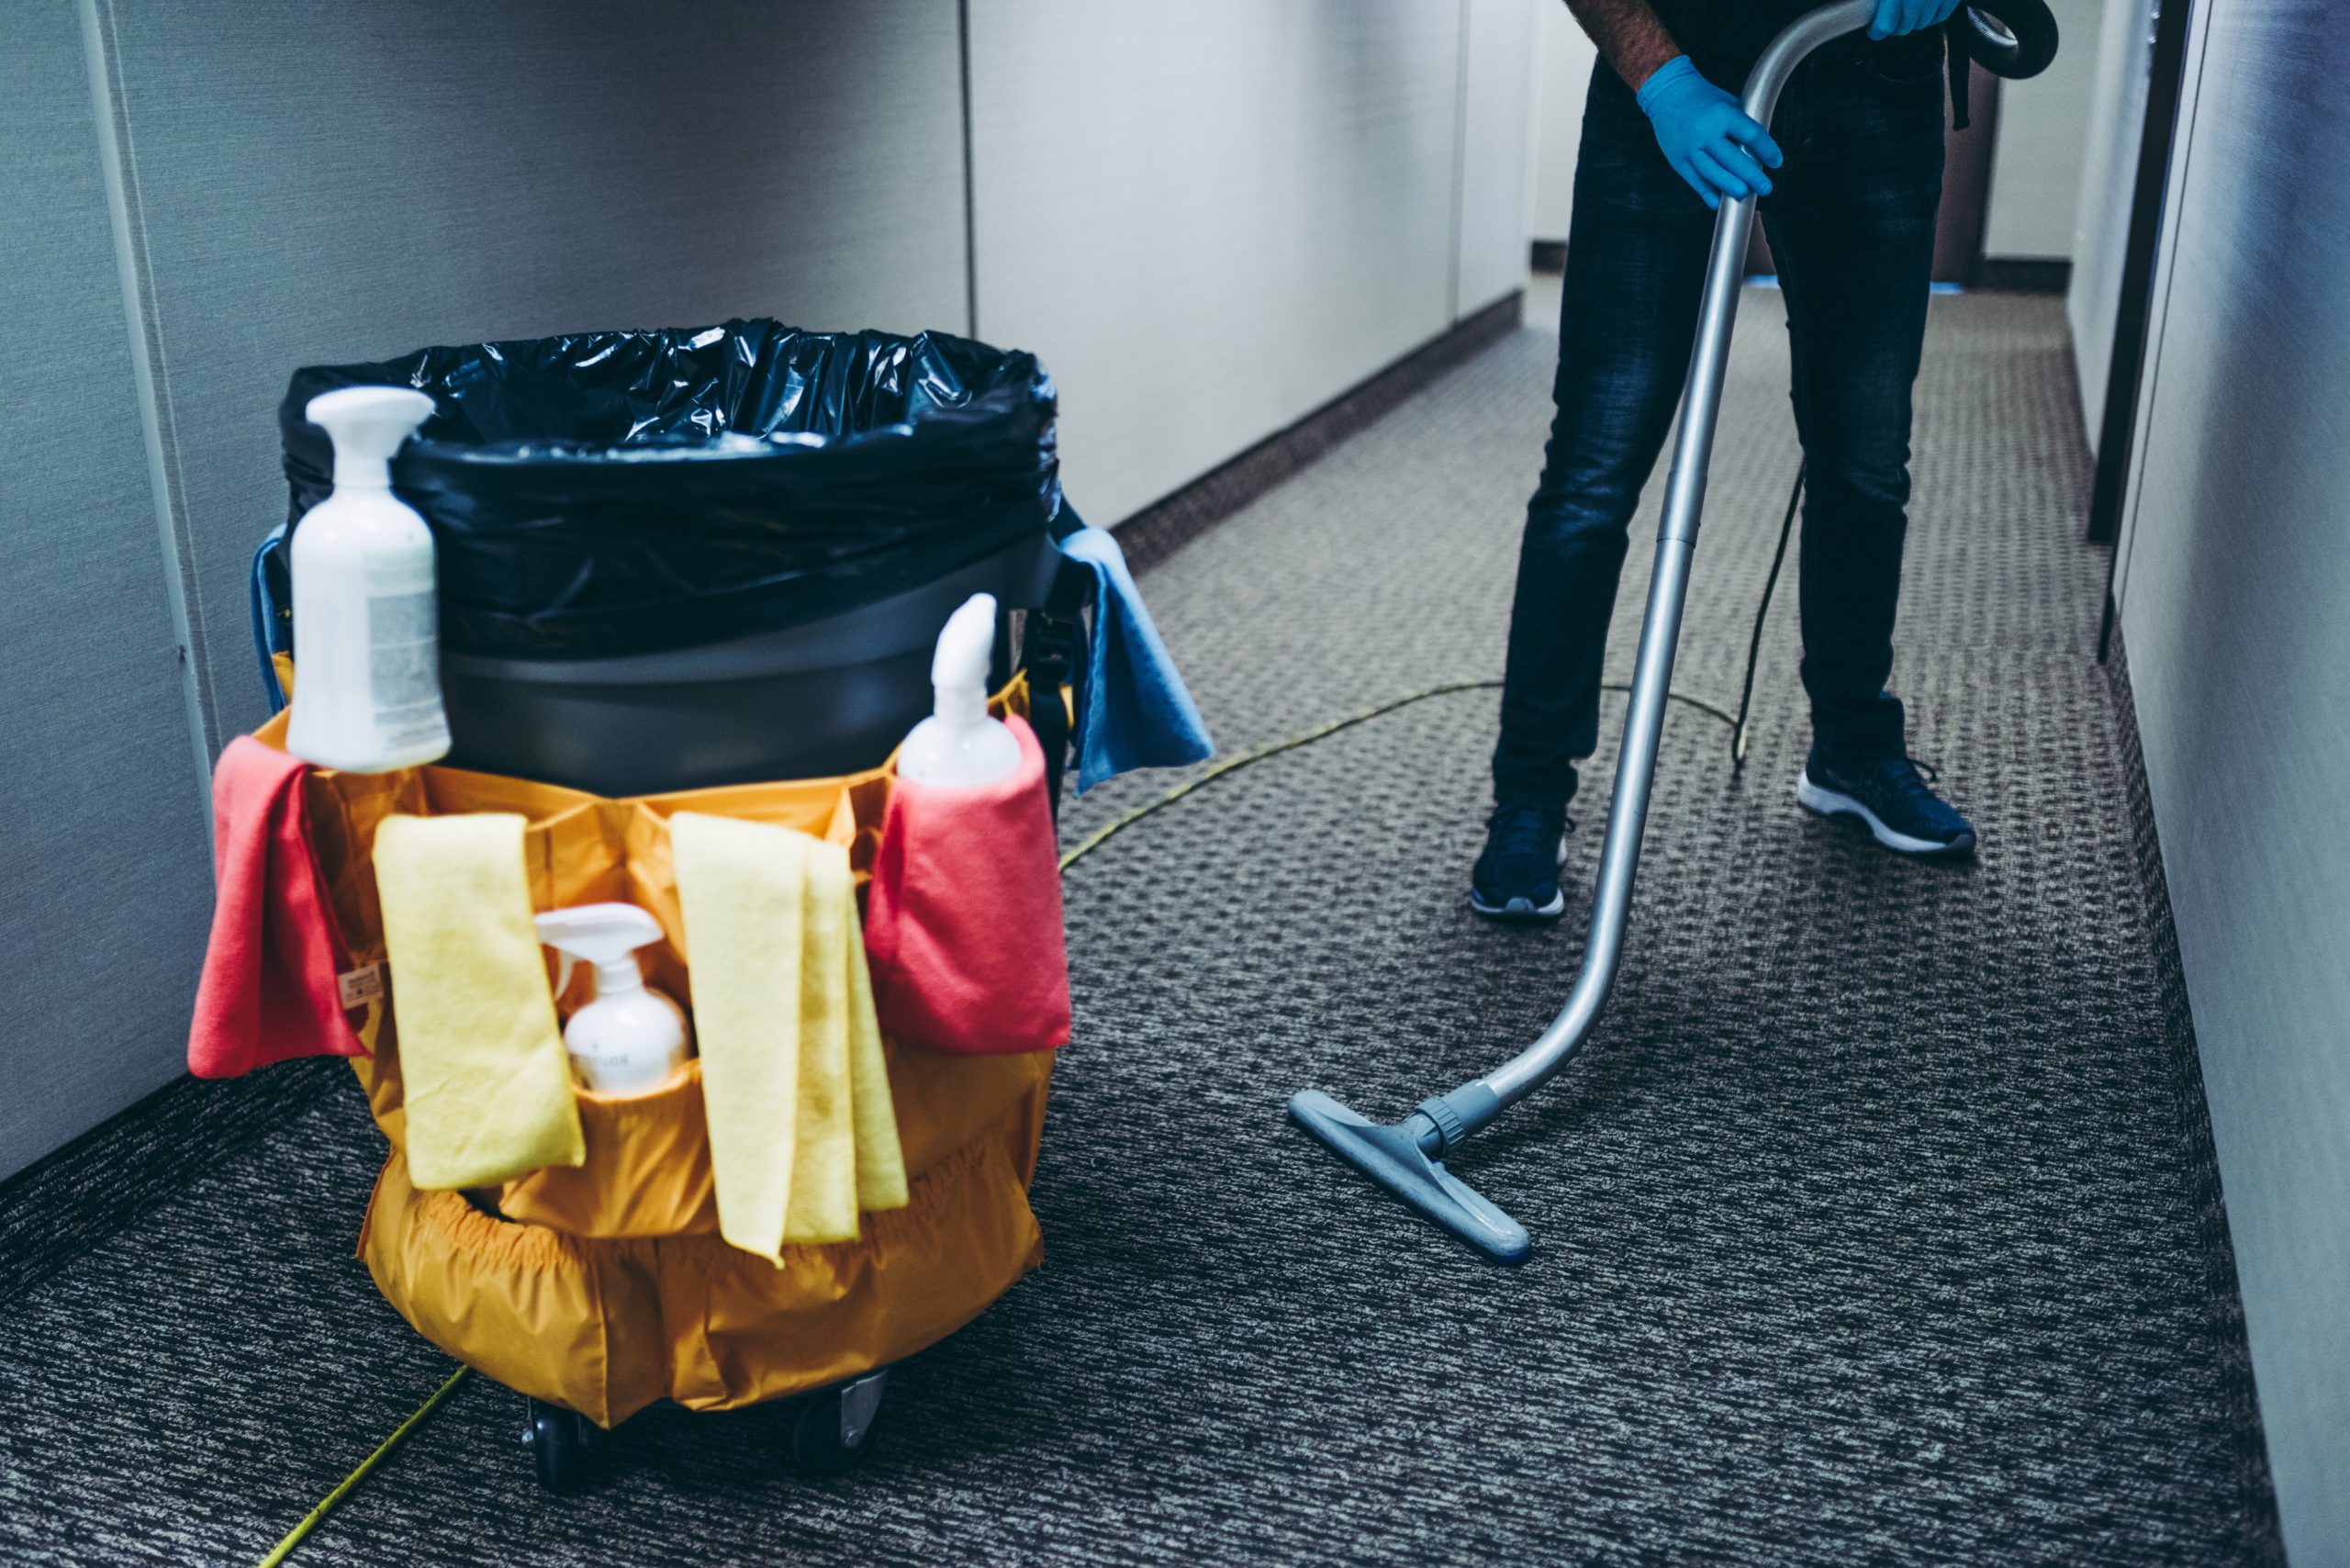 Trash can with cleaning supplies next to janitor vacuuming floor